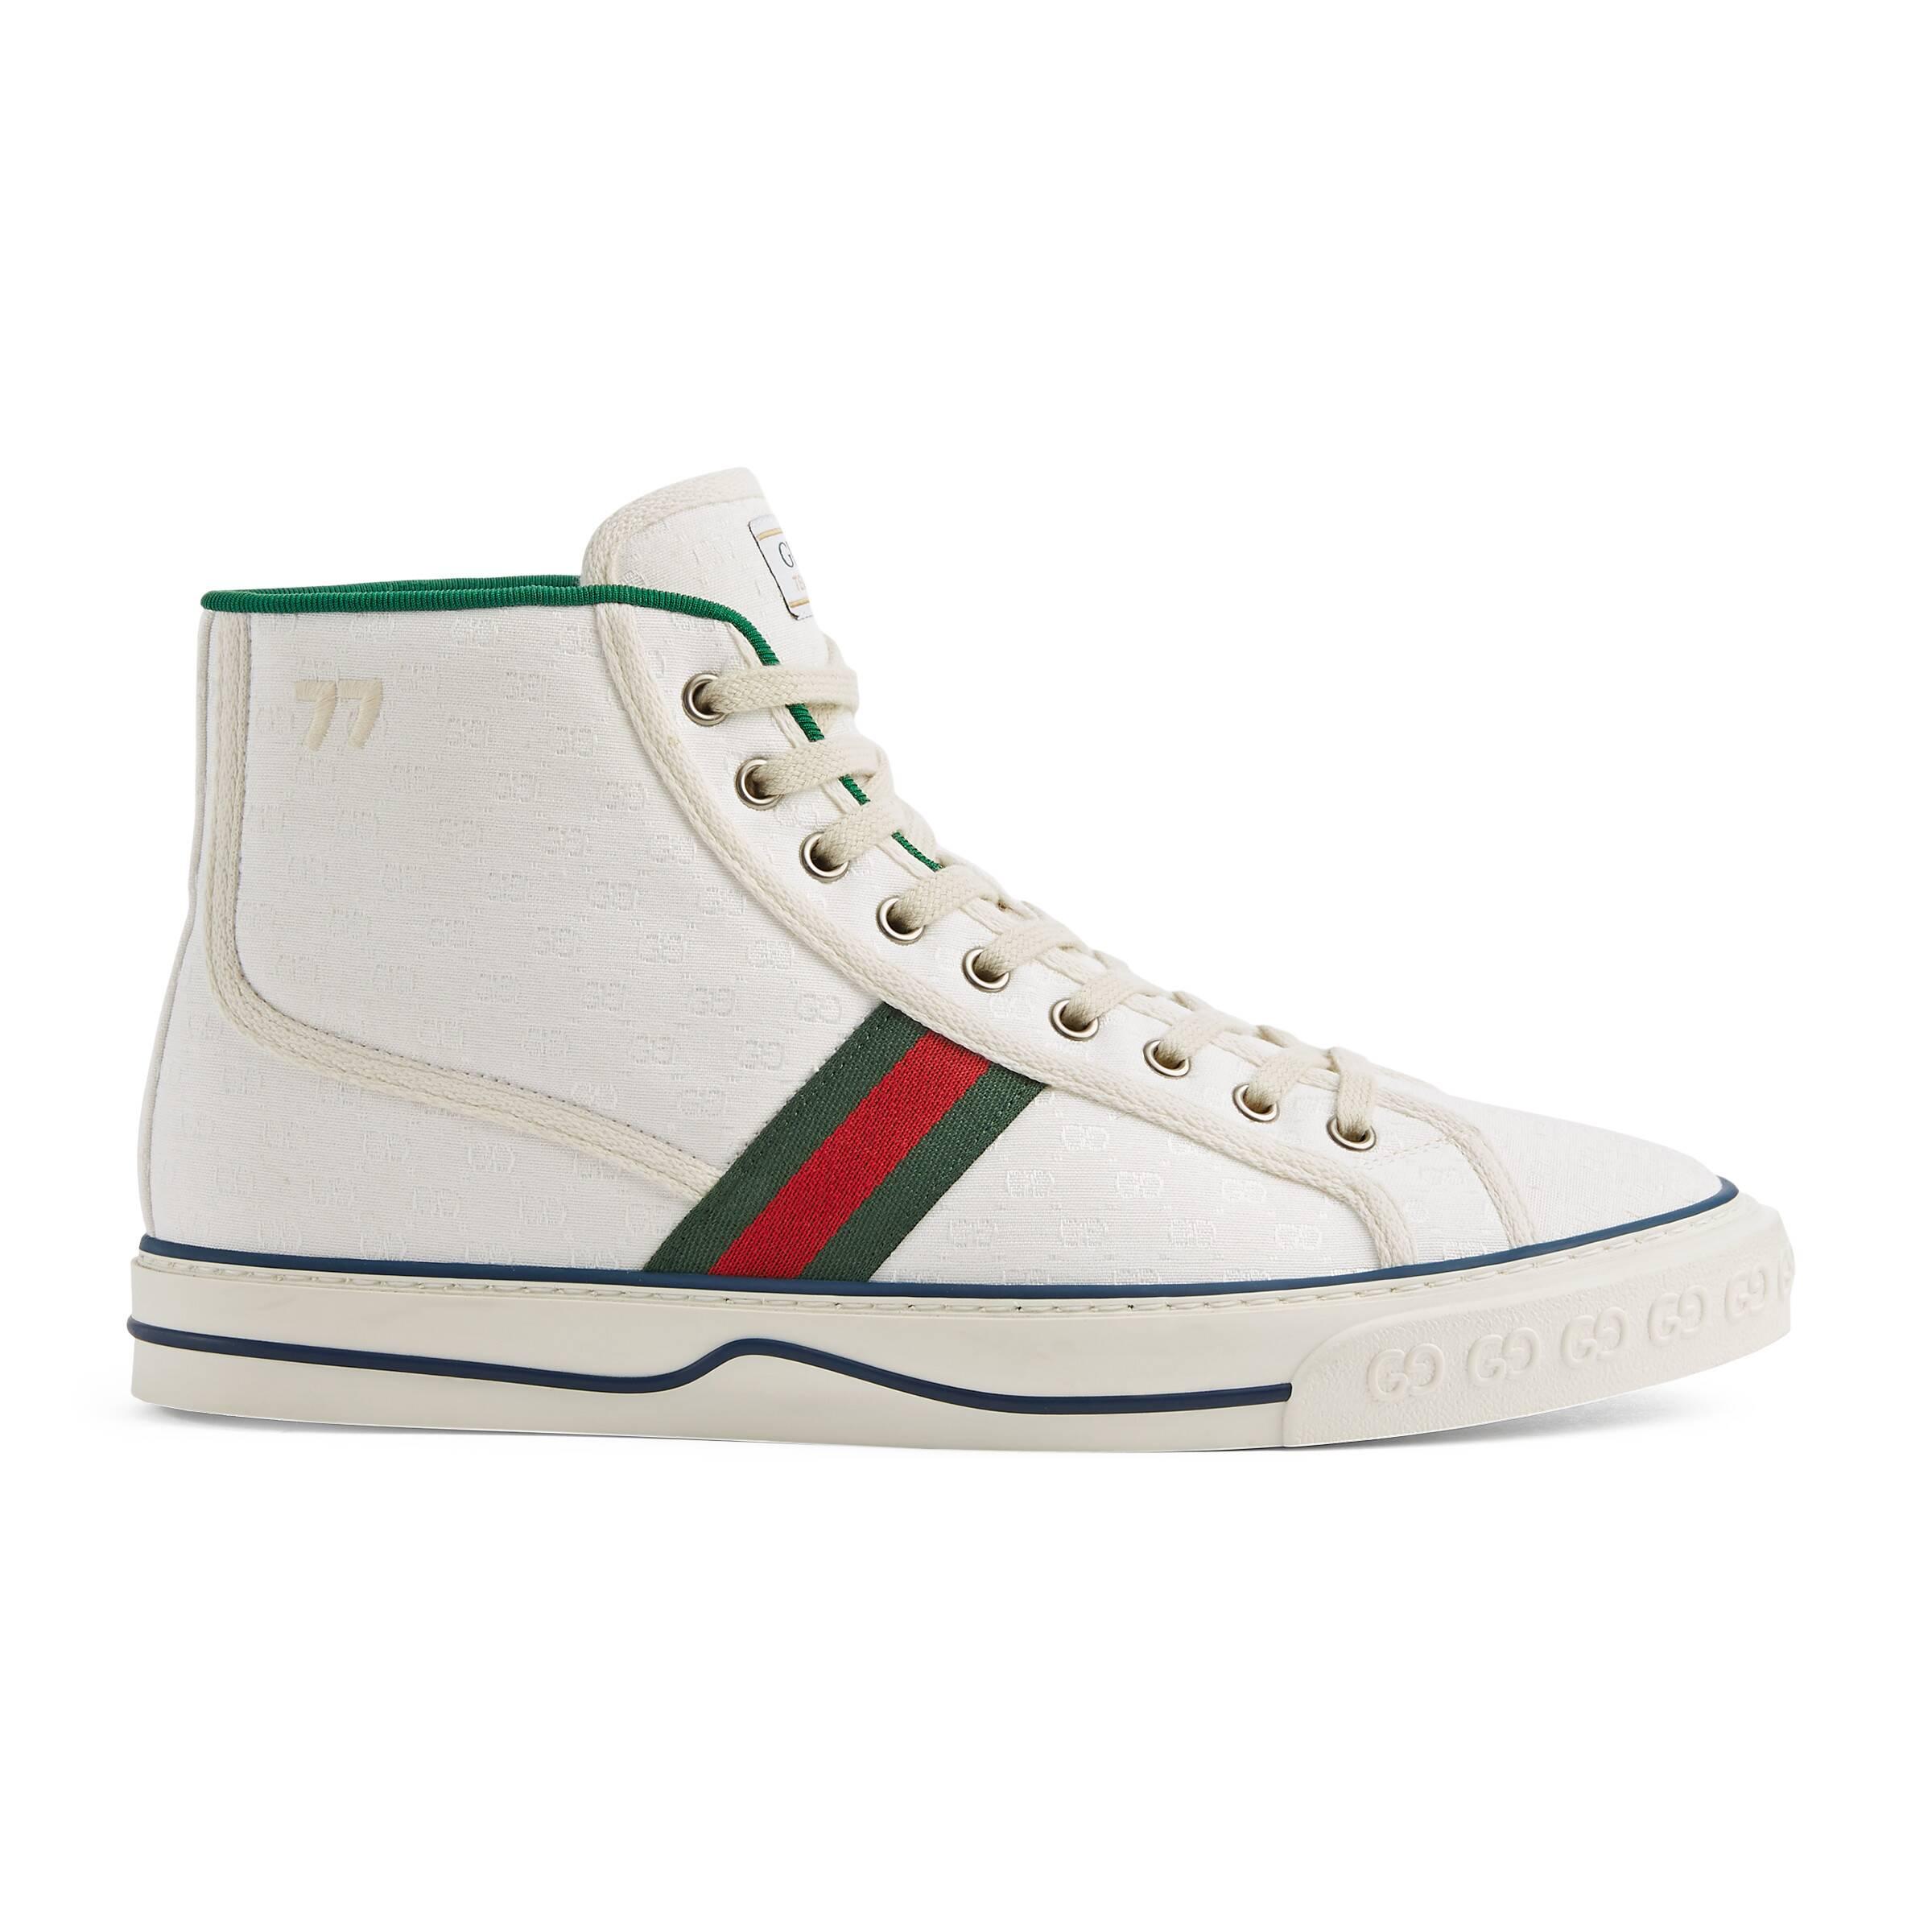 Gucci Tennis 1977 High Top Sneaker in White for Men - Lyst